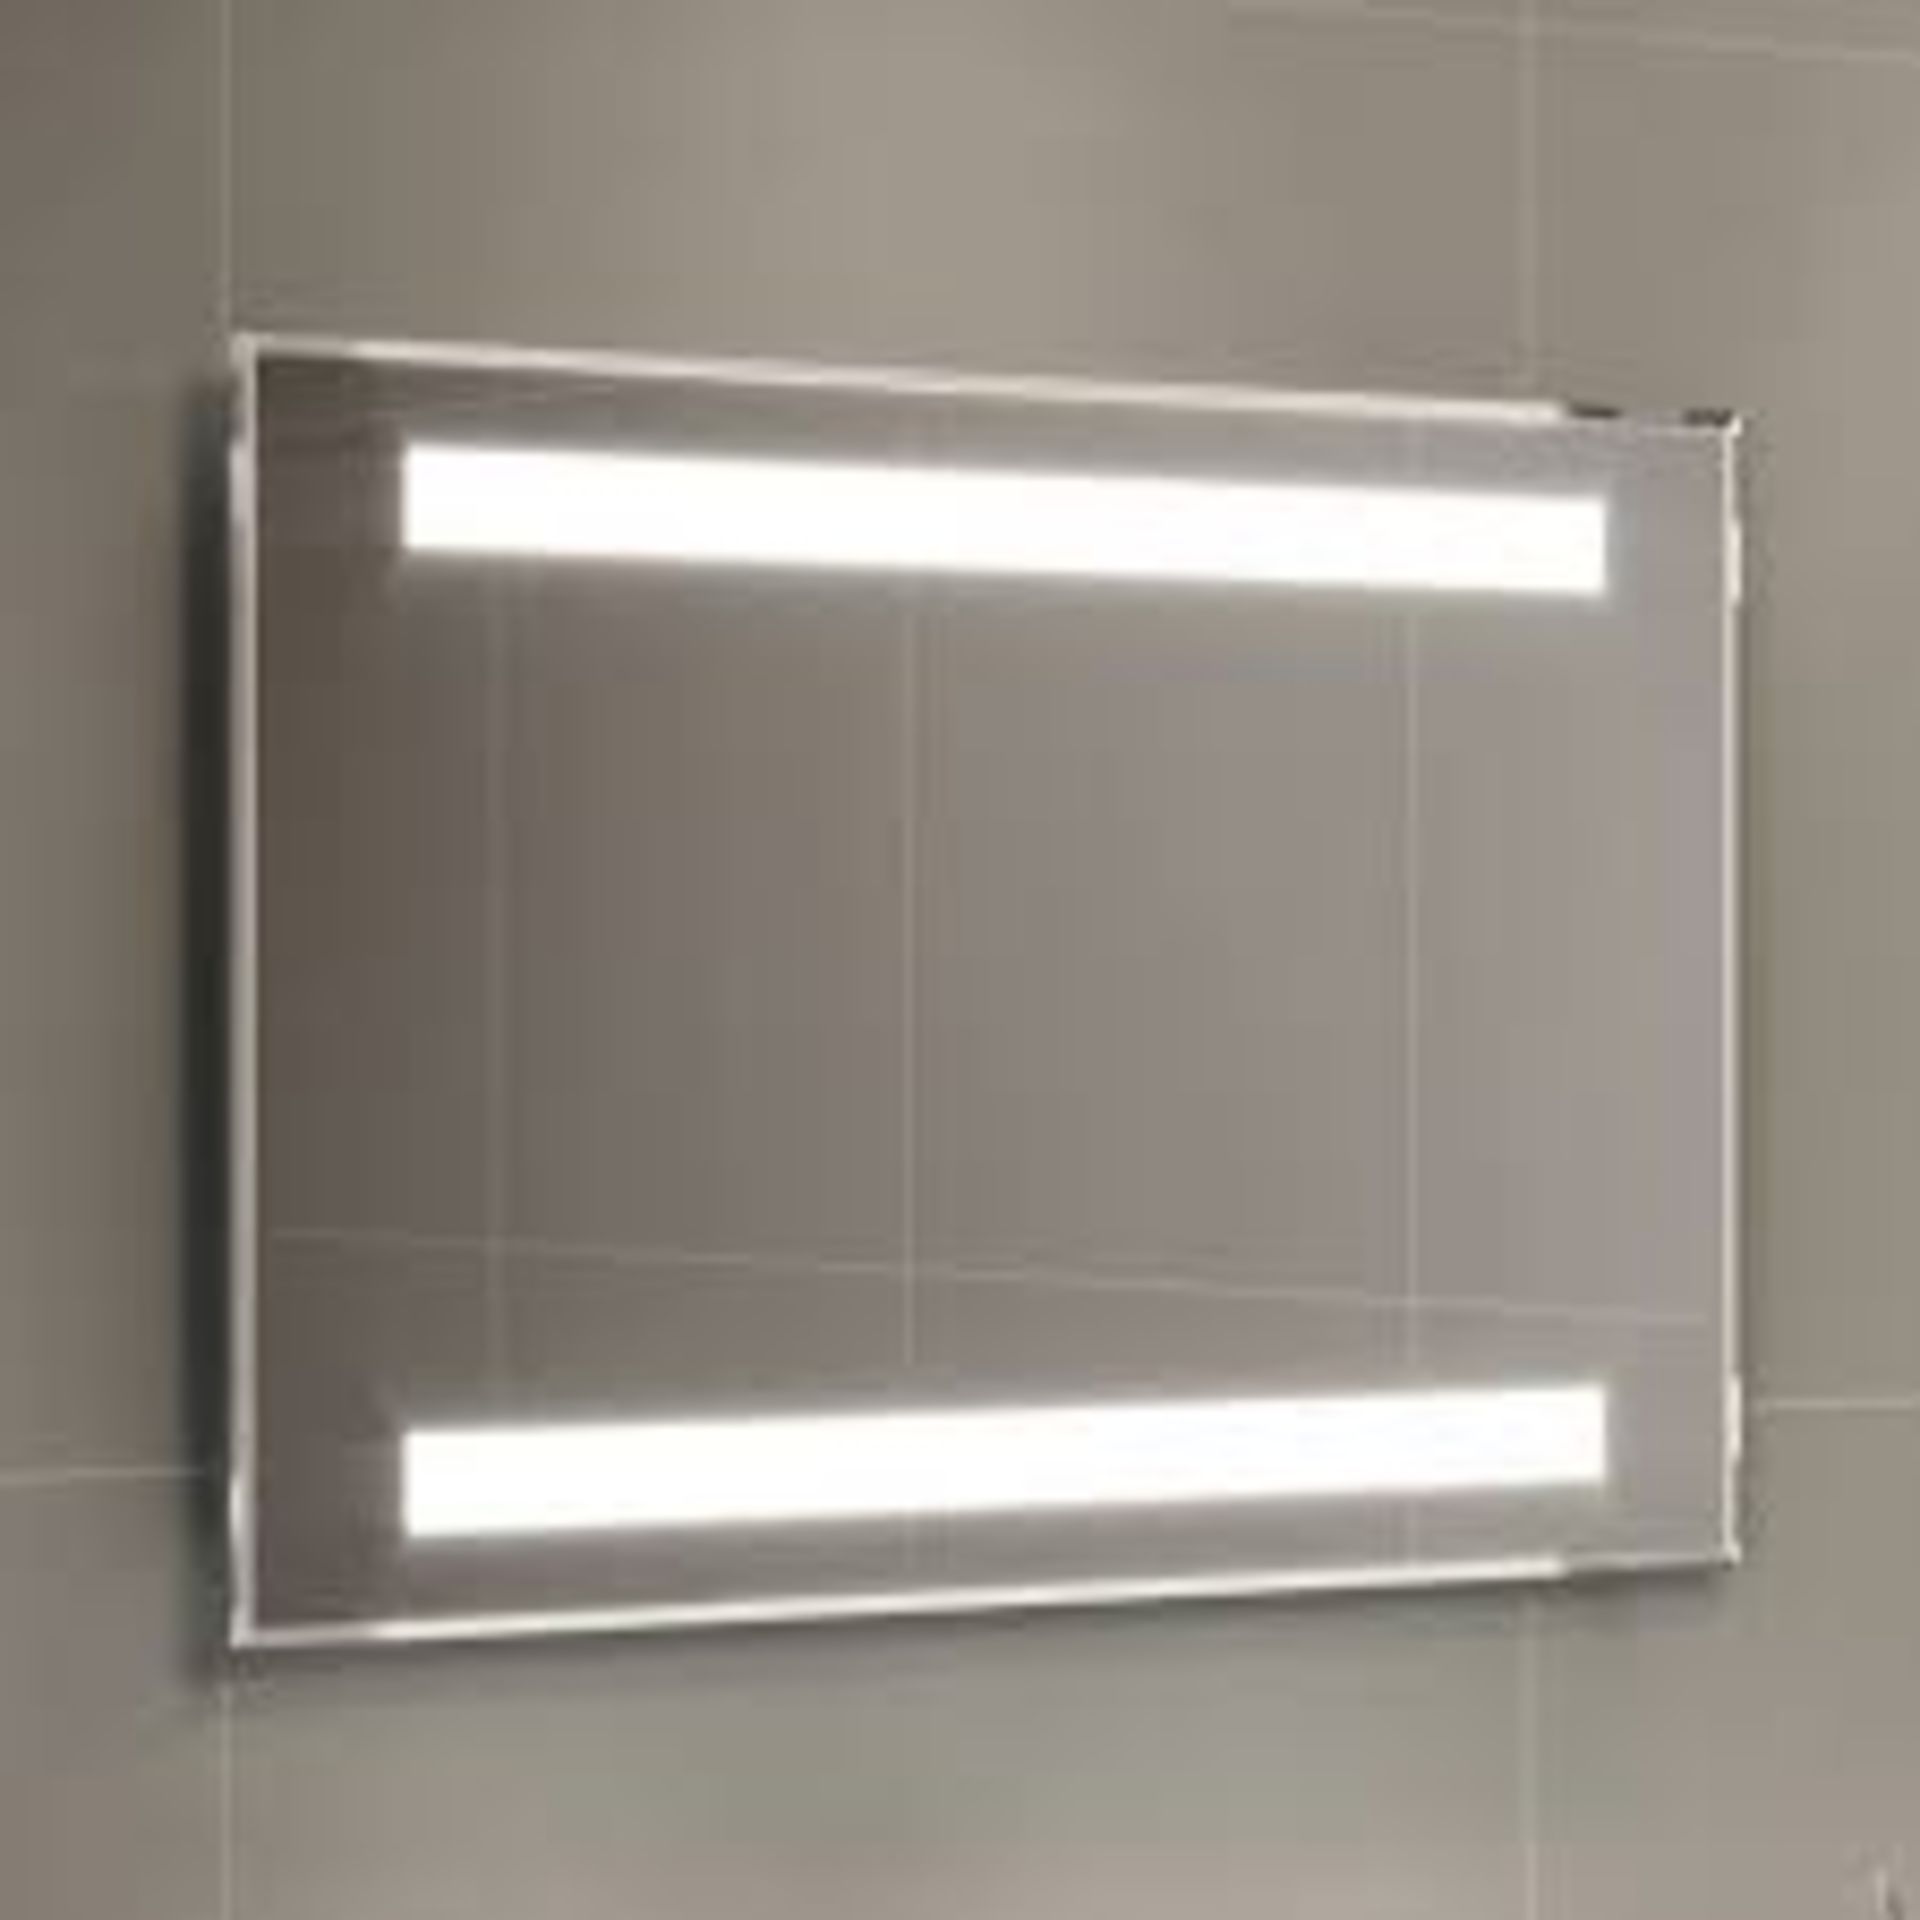 (J120) 500x700mm Omega LED Mirror - Battery Operated. RRP £299.99. Energy saving controlled On / Off - Image 3 of 4